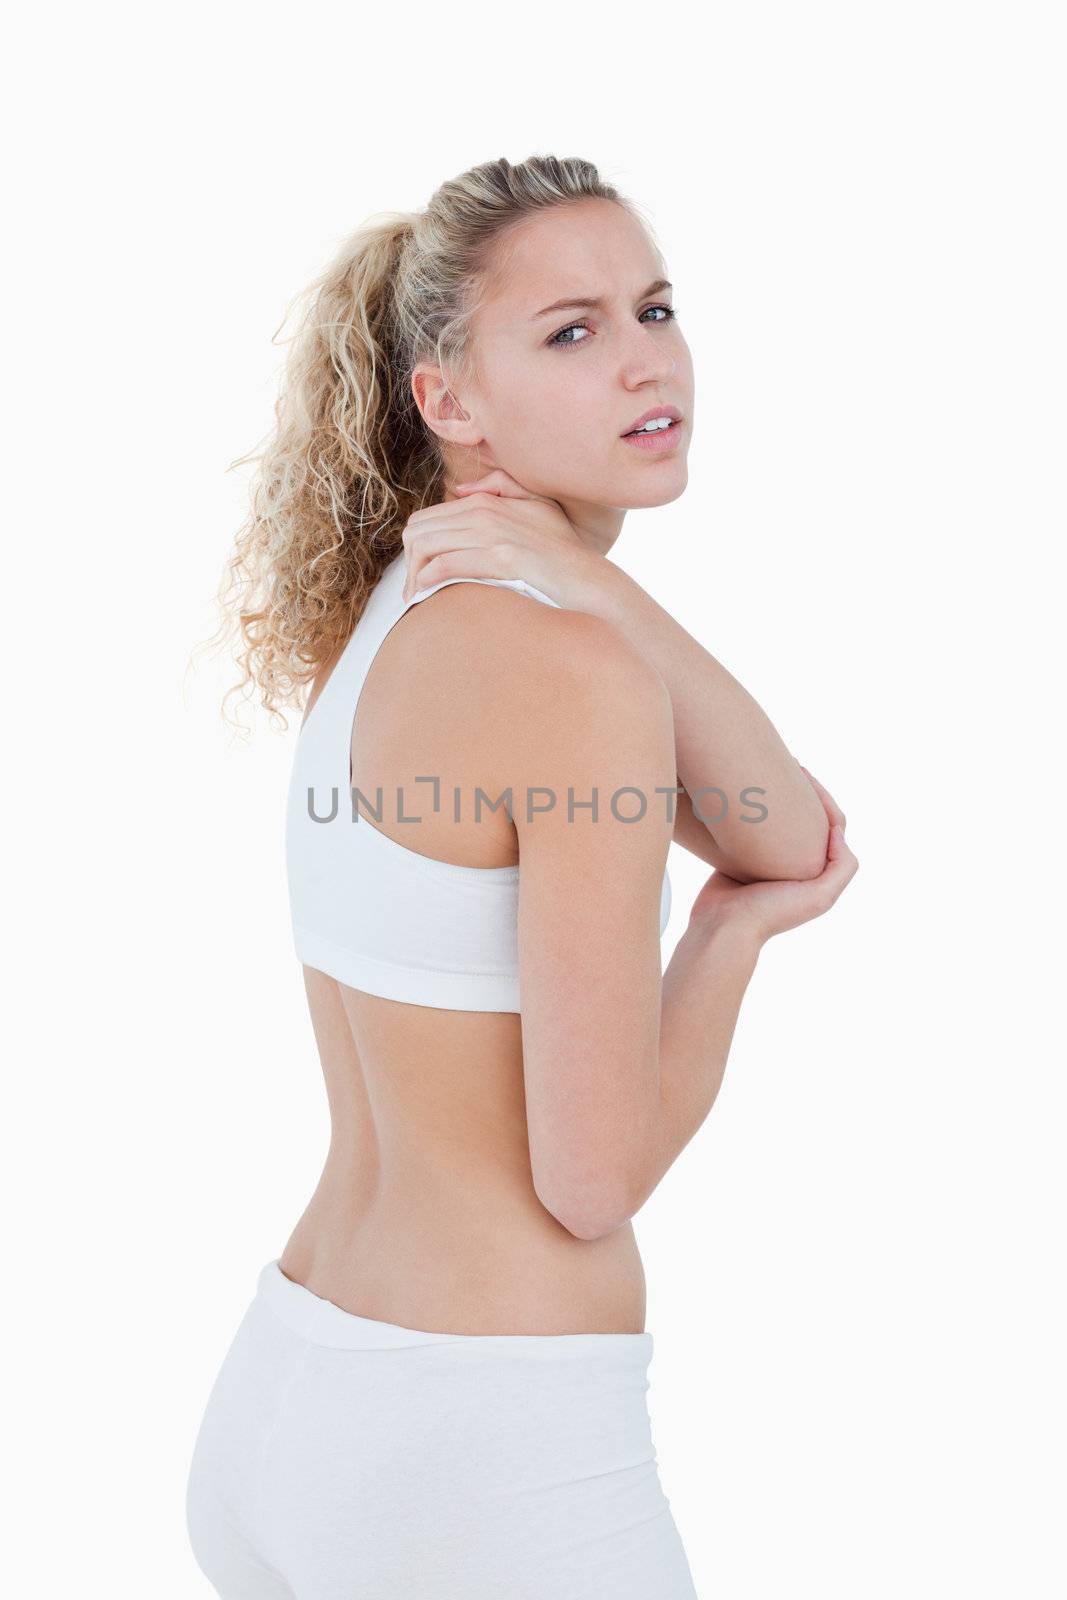 Young woman showing a pain in her shoulder against a white background